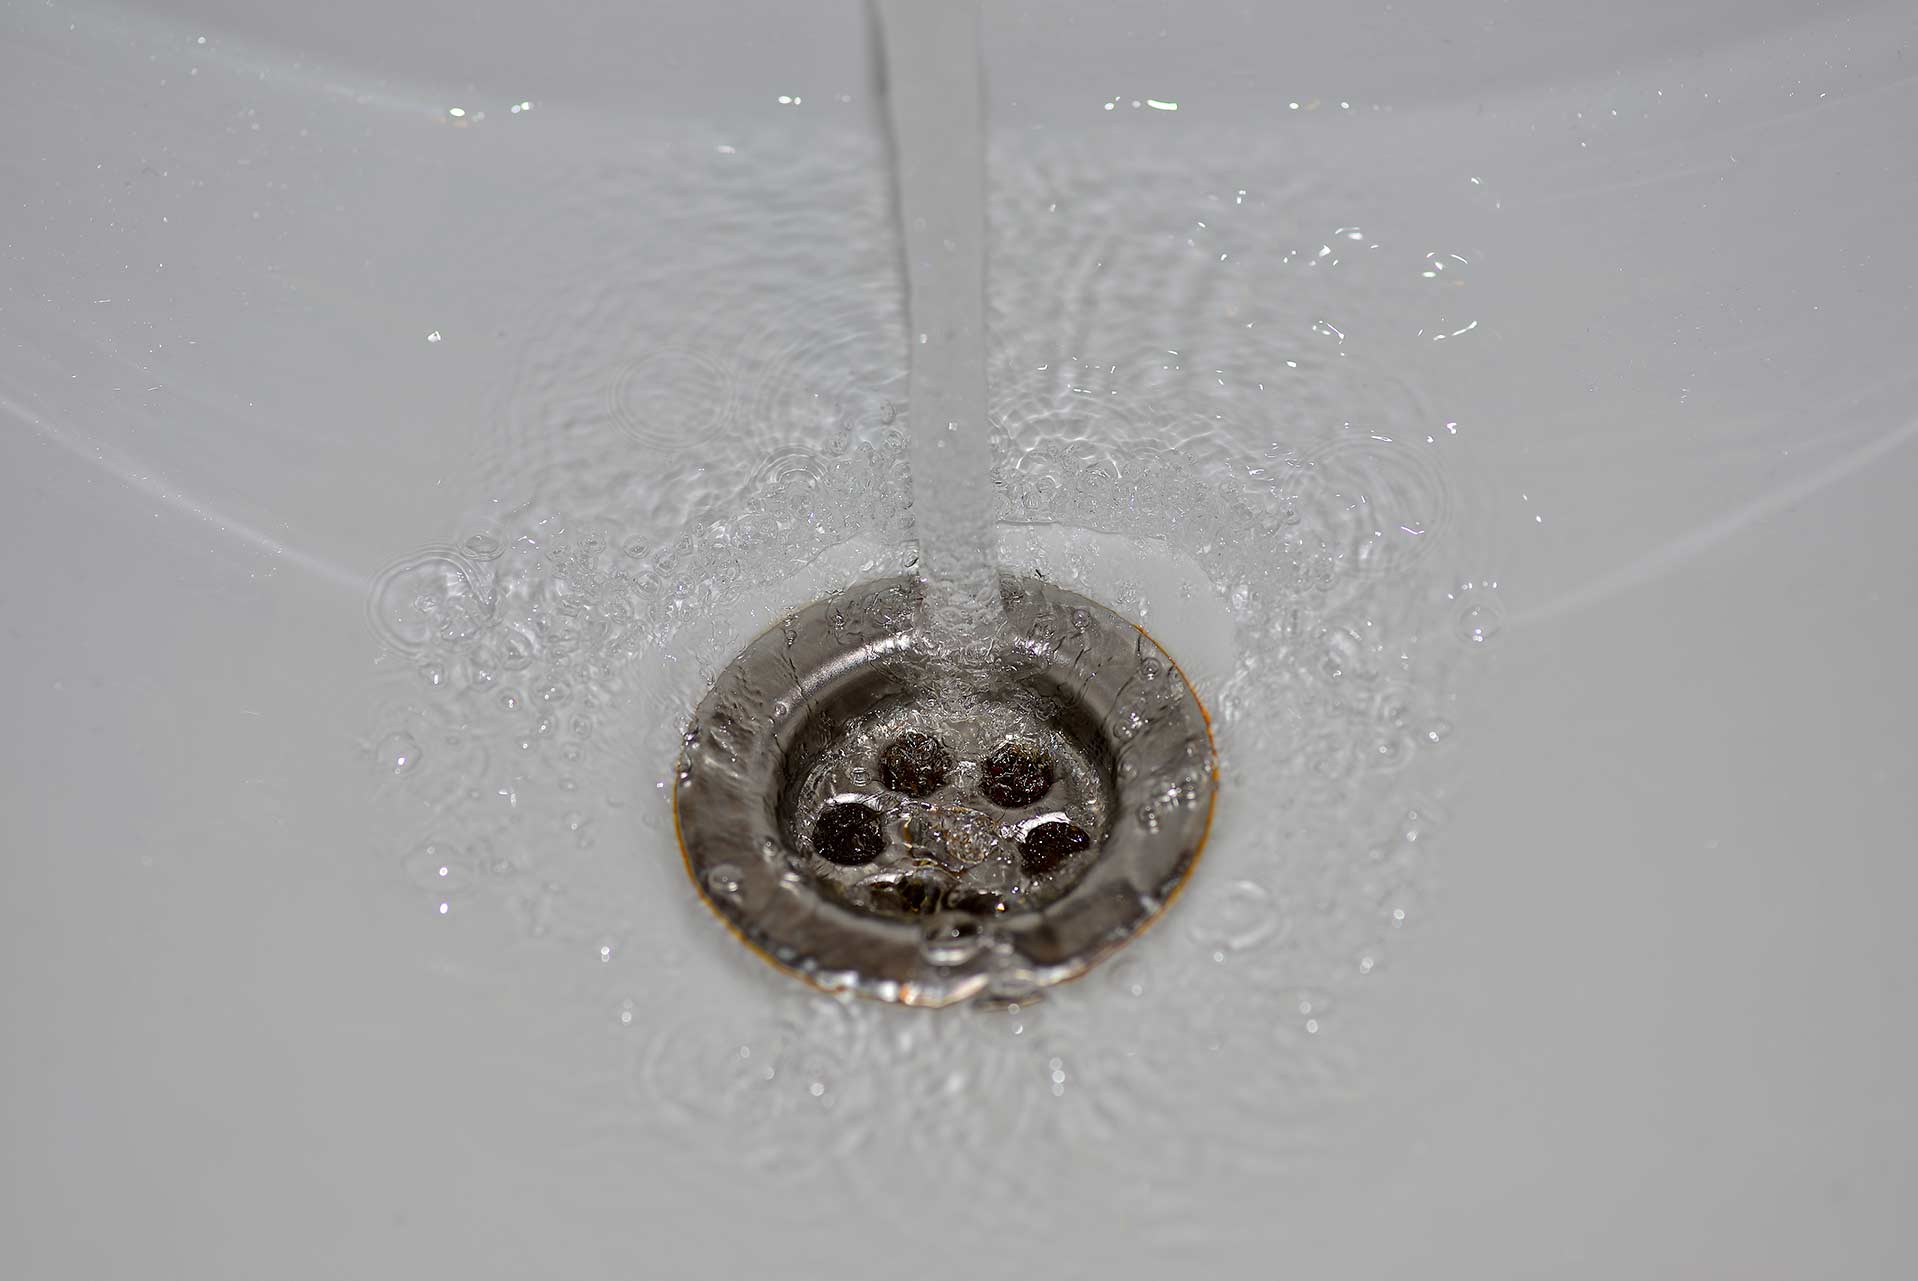 A2B Drains provides services to unblock blocked sinks and drains for properties in Harrow.